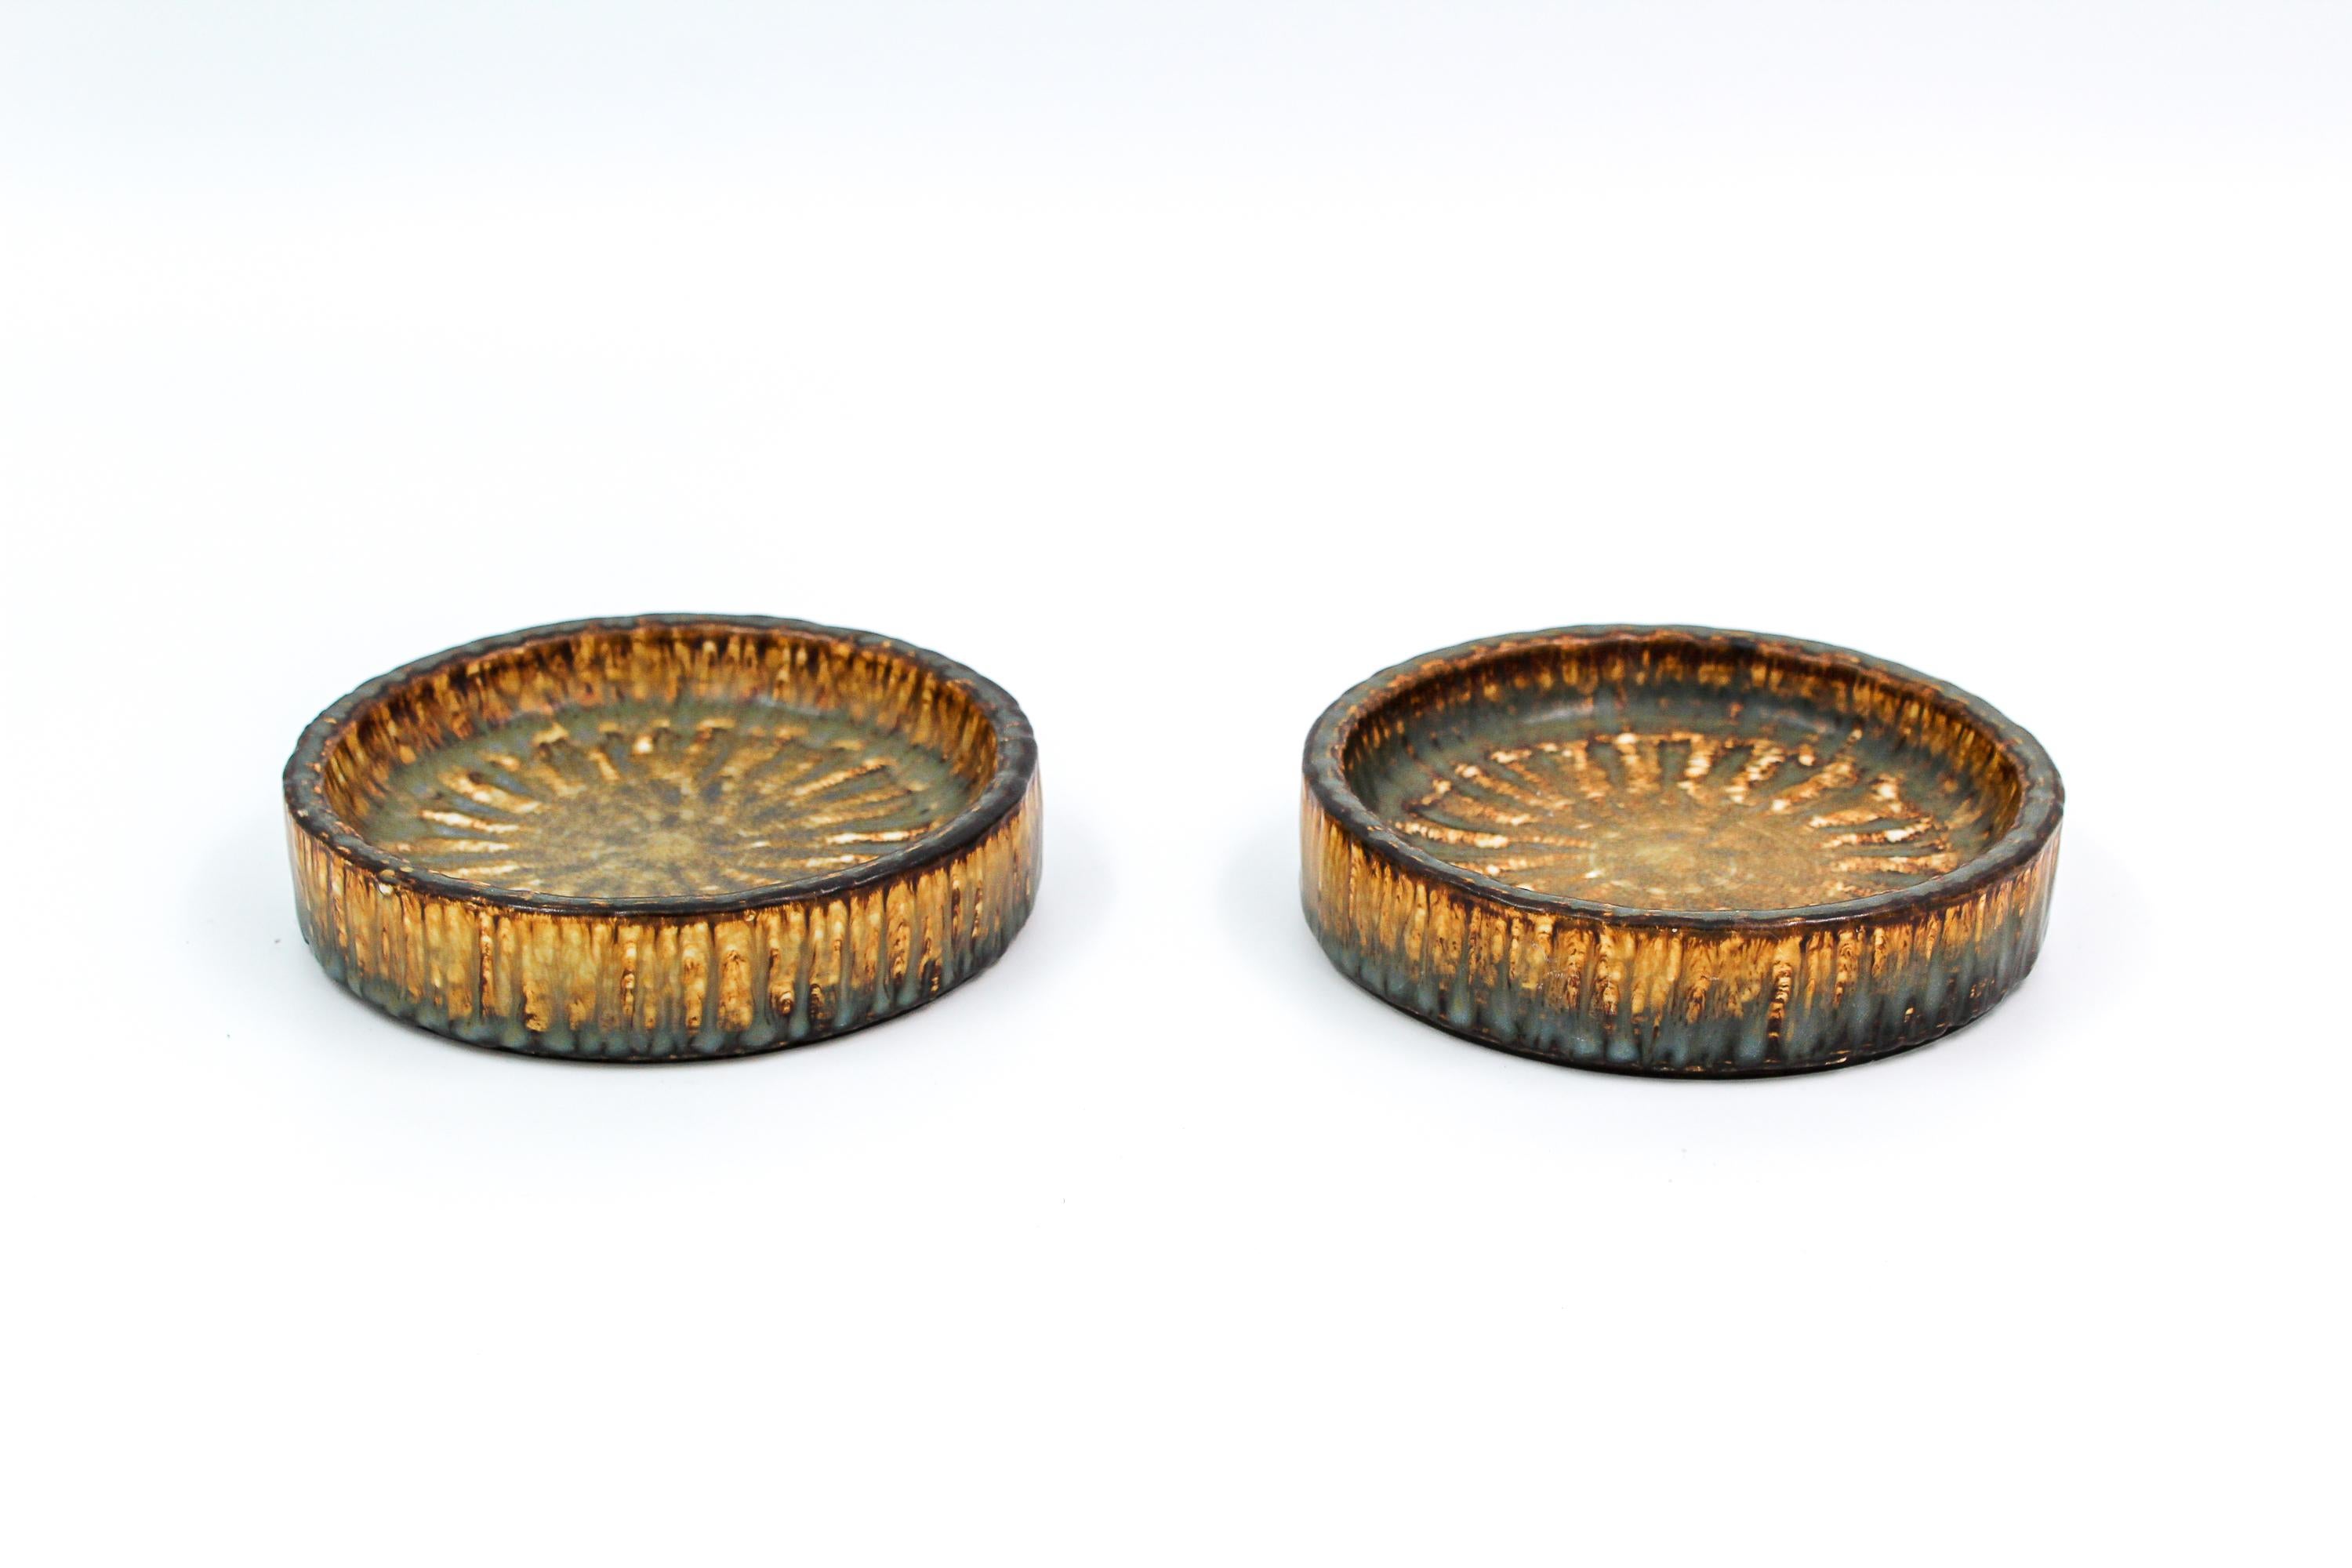 A pairs of very decorative bowls by Swedish designer and potter Gunnar Nylund. Made by Rörstrand in the 1950s. 
Very good vintage condition.